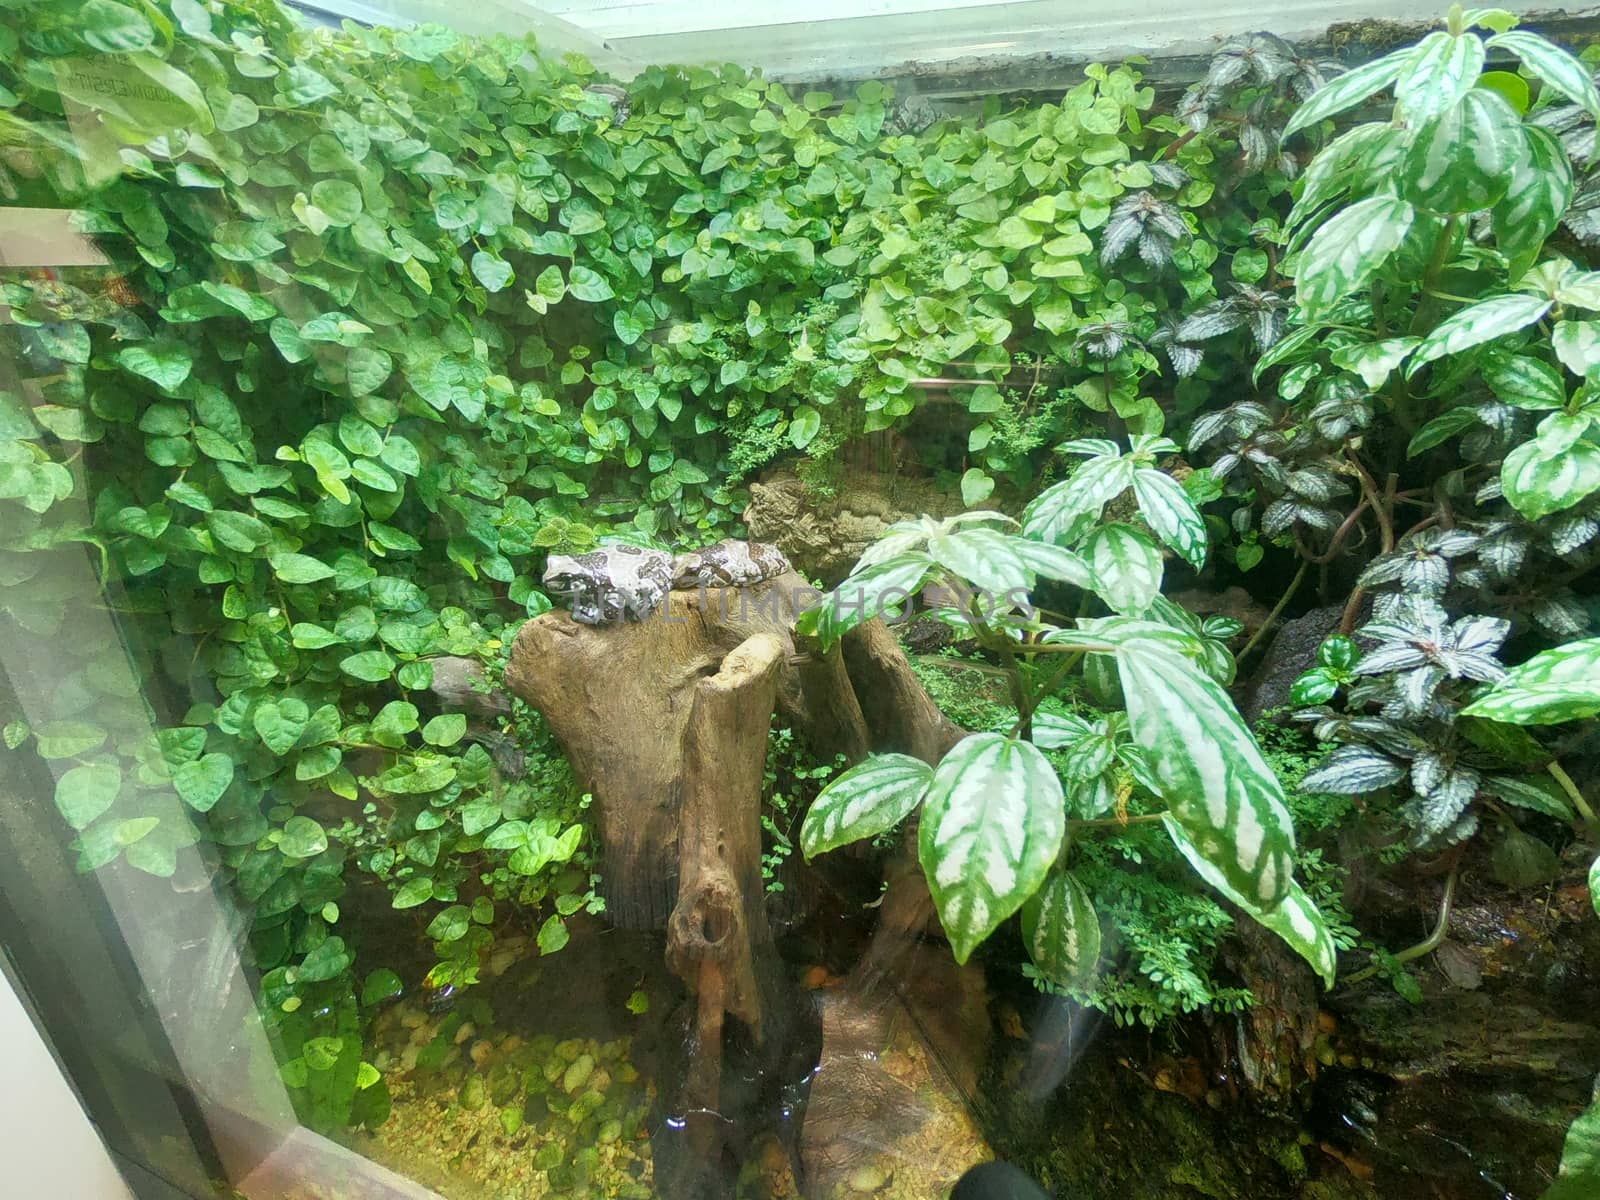 Frog Display Behind Glass in Green Planet - Indoor Tropical Rain Forest Tourist Attraction, City Walk, Dubai by sn040288